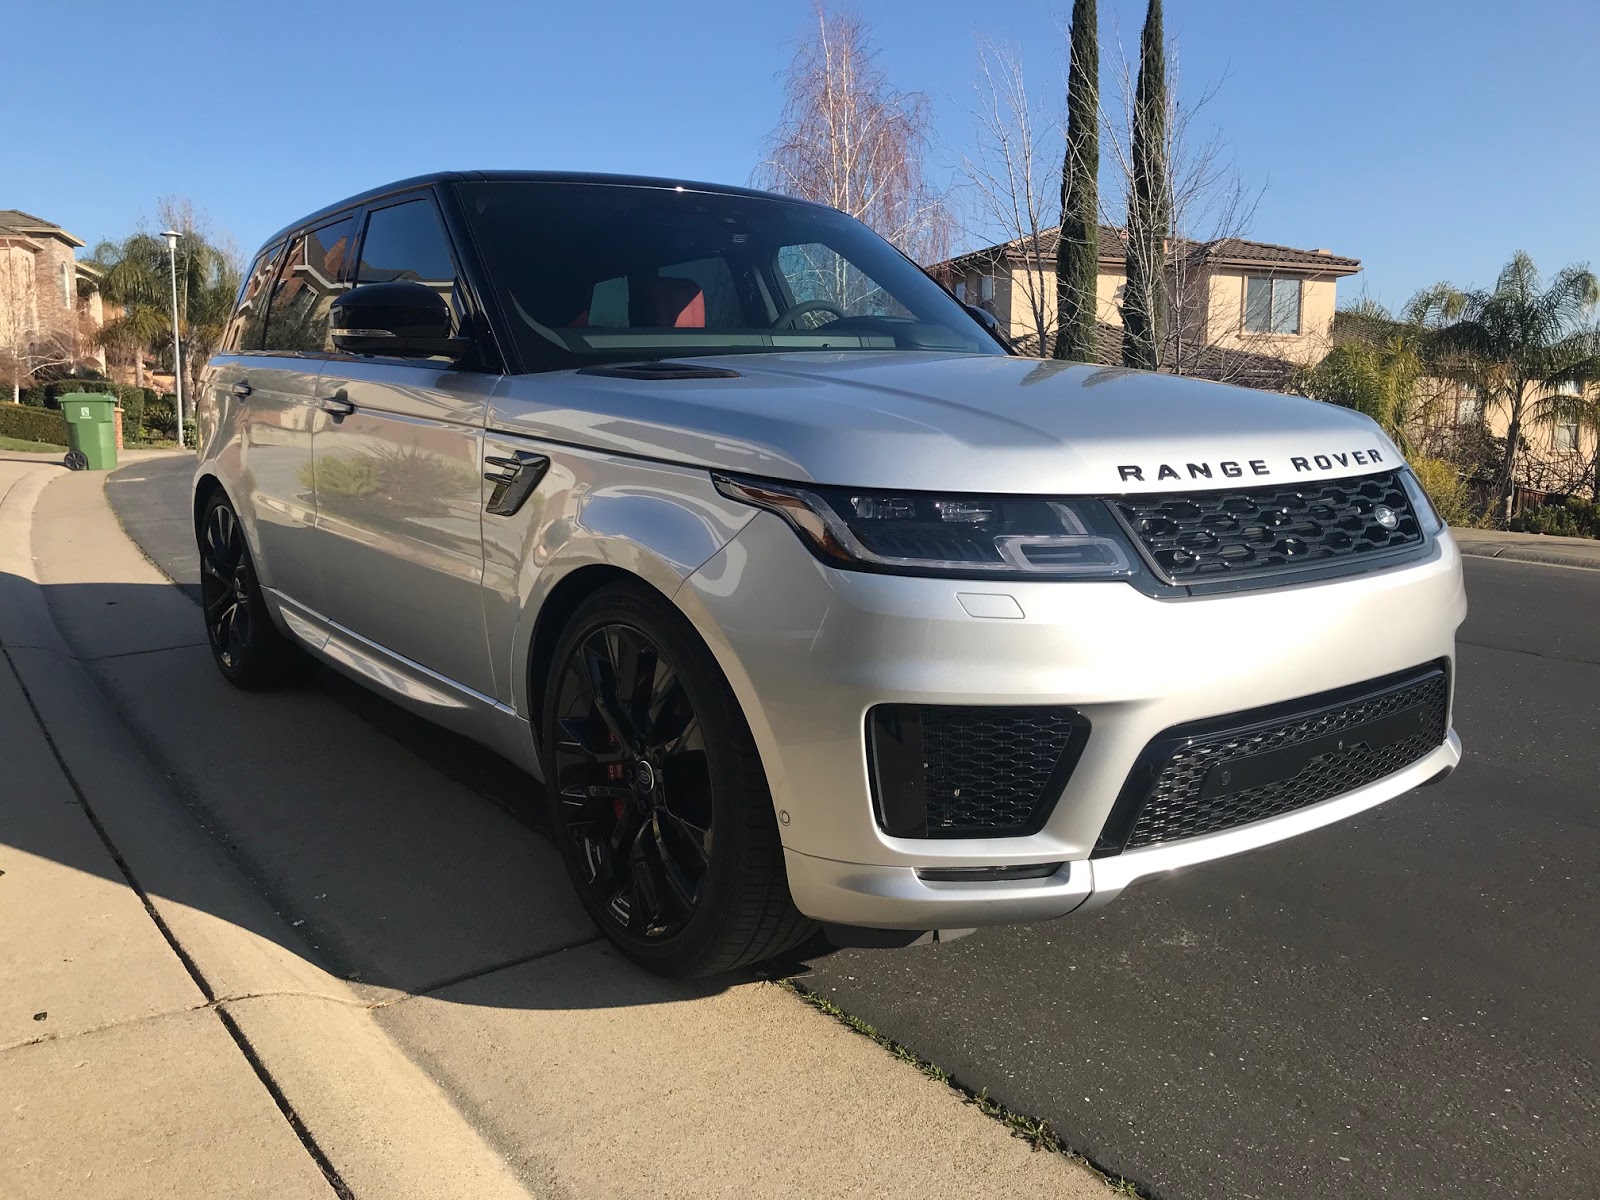 At The Intersection of Mild and Wild: The 2019 Range Rover Sport HST MHEV